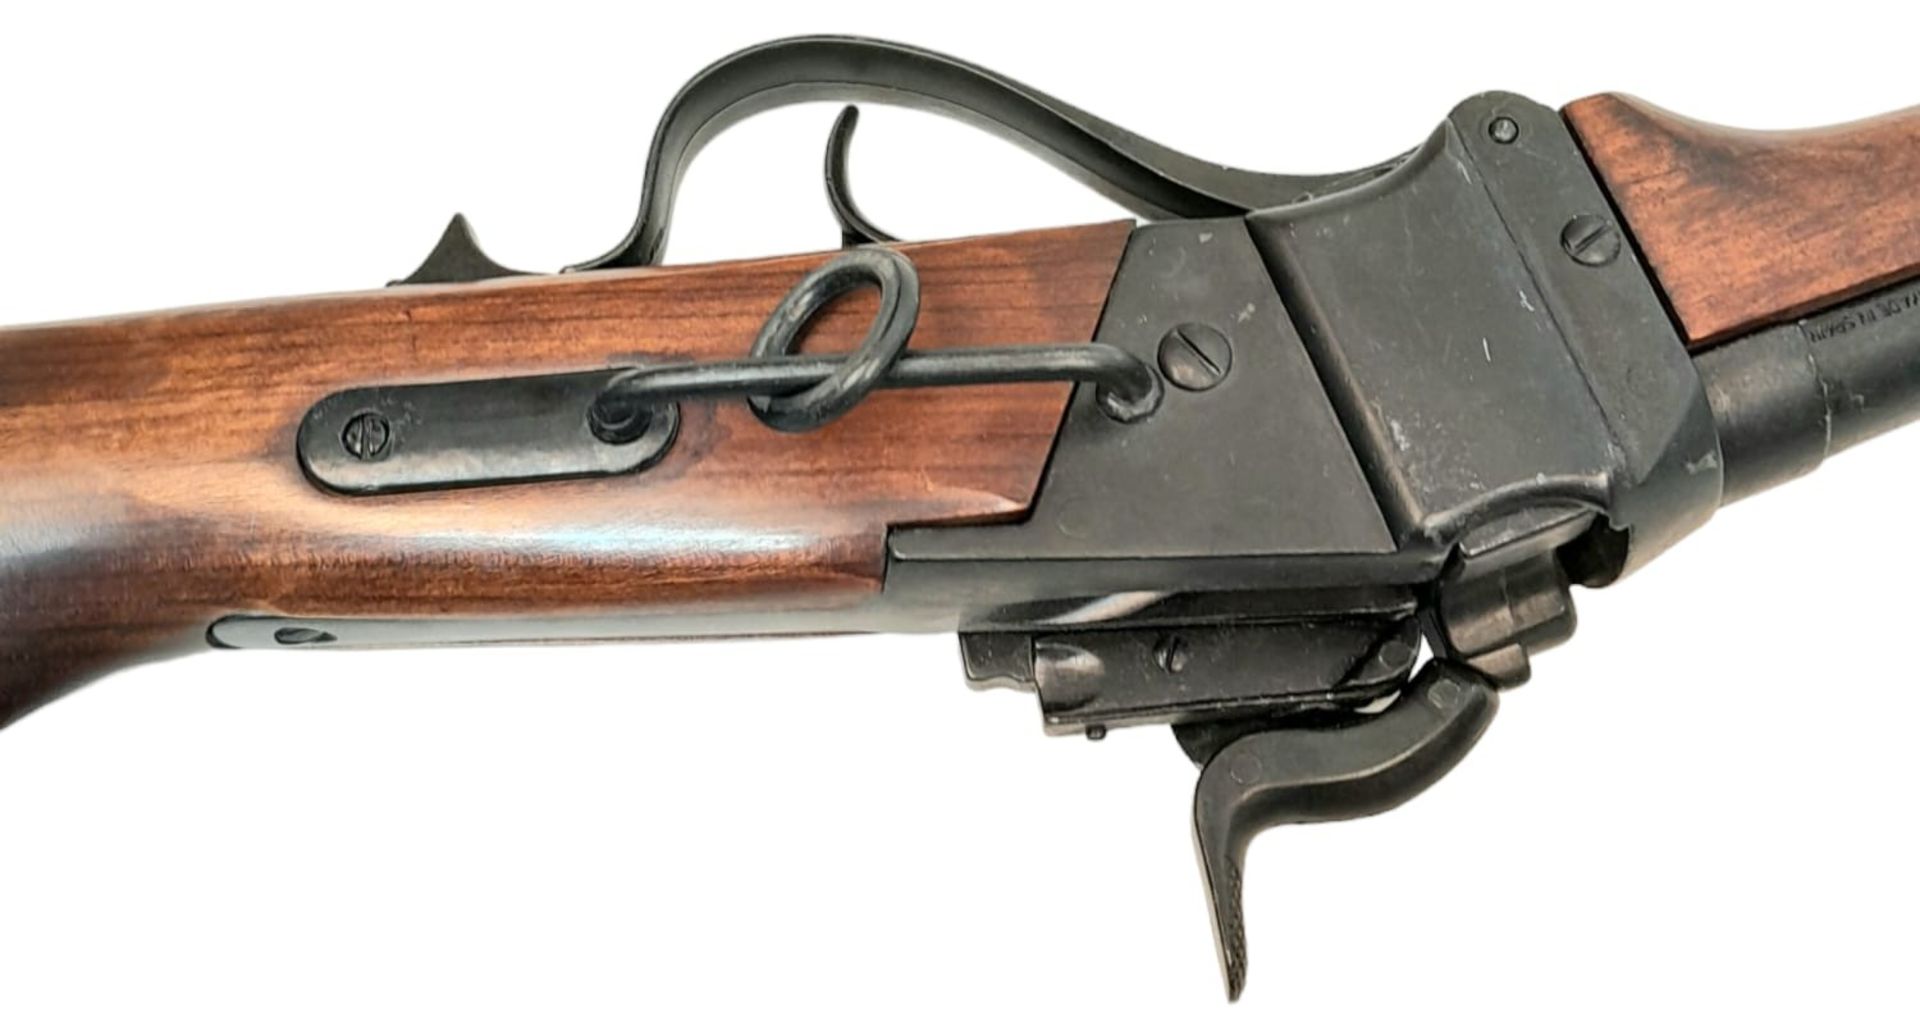 A Vintage, Full Weight and Size, Retrospective Inert Replica of an 1859 Carbine Rifle. Wood and - Image 7 of 11